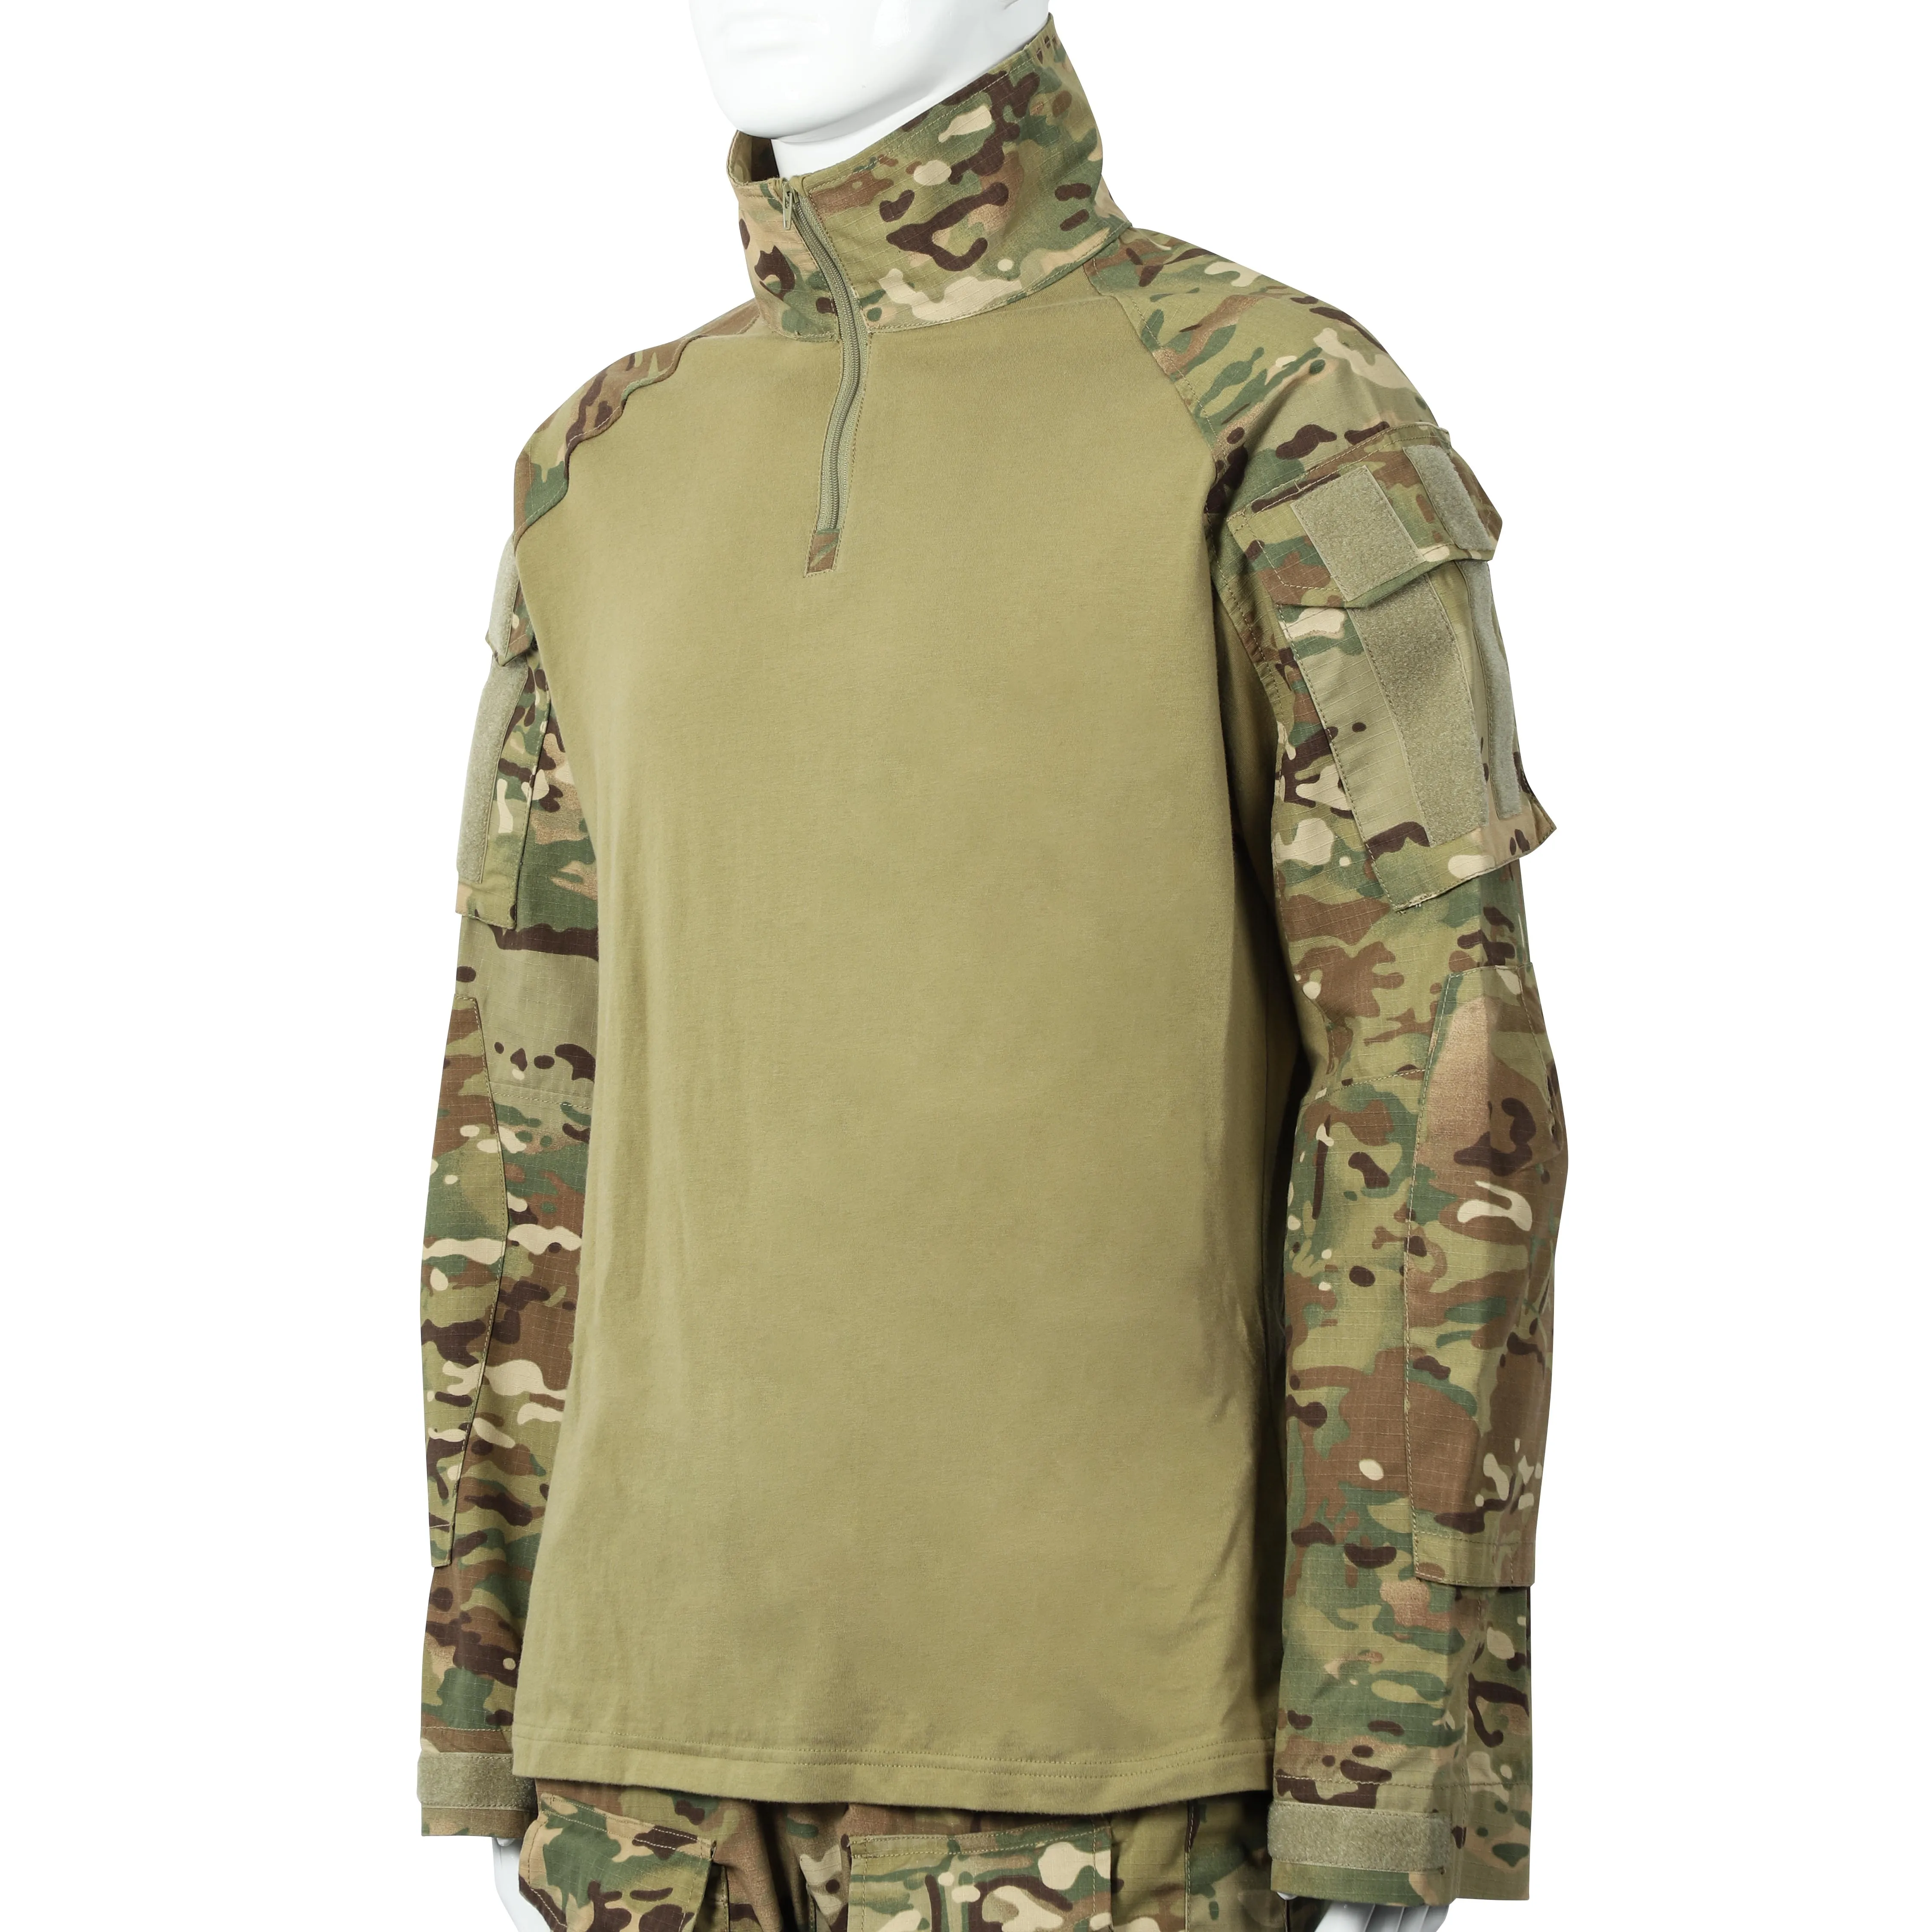 Outdoor Tactical Clothing Camouflage Tactical Uniform Tactical Combat ...